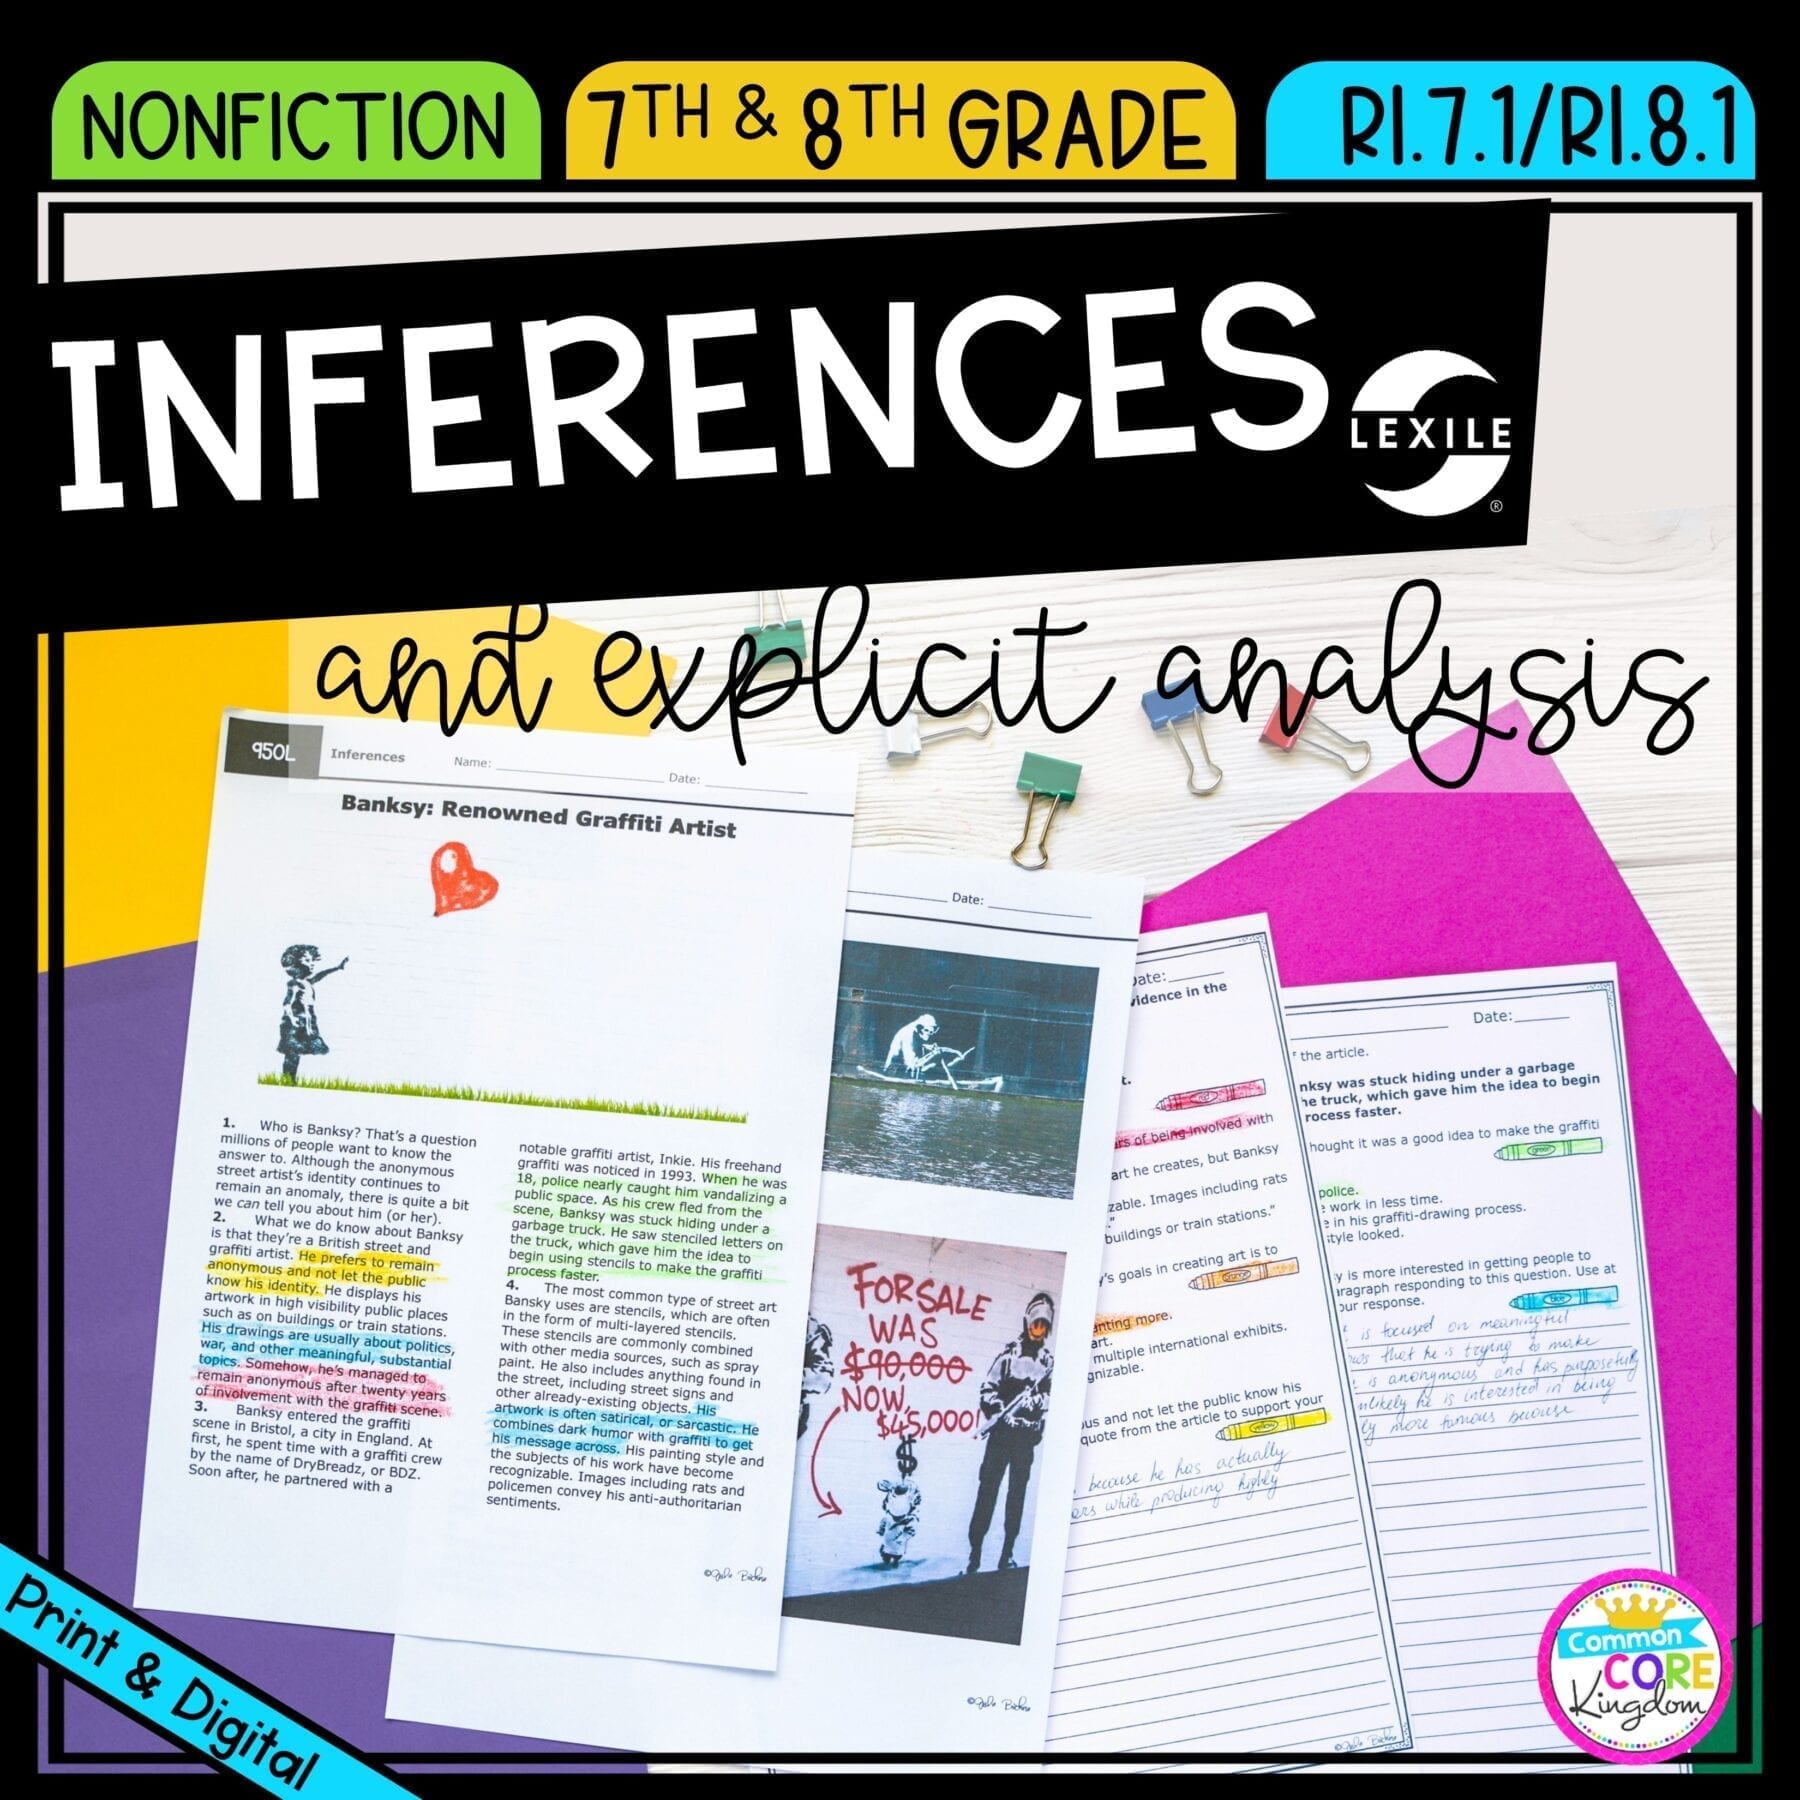 Inferences and explicit analysis cover for 7th & 8th grades, showing a reading passage and question sheets that are available in printable and digital formats